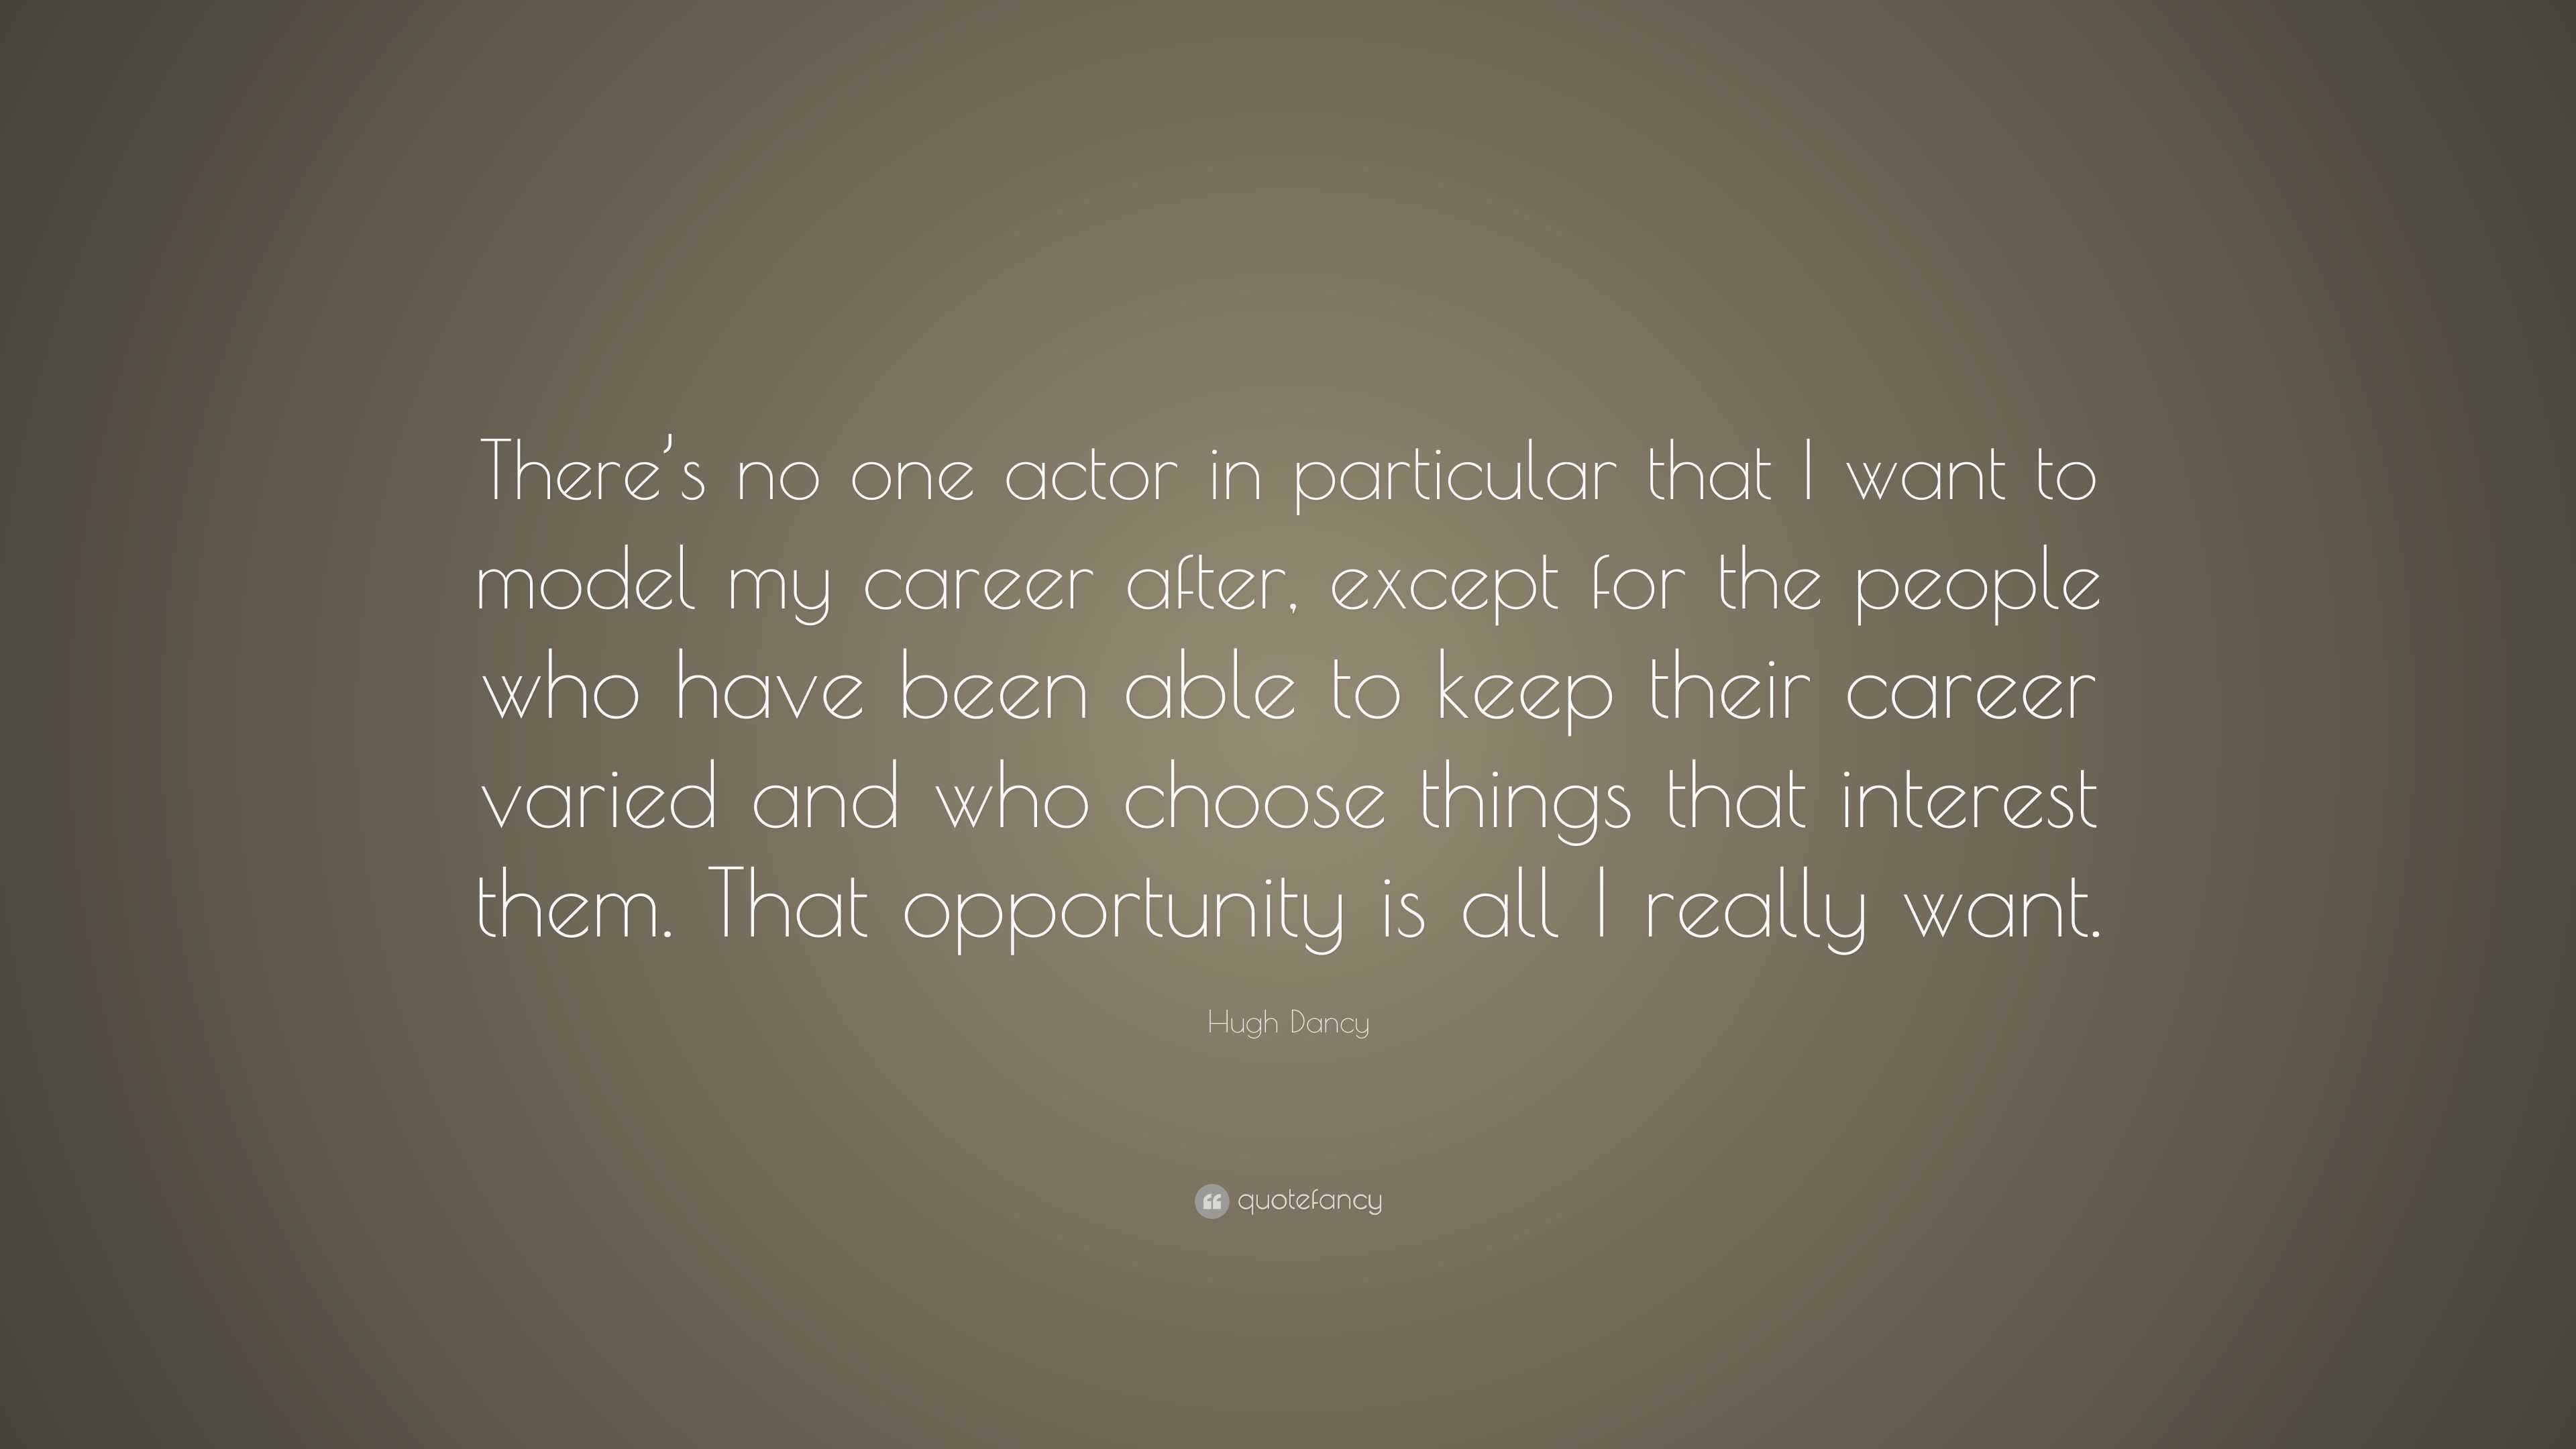 Hugh Dancy Quote: “There’s no one actor in particular that I want to ...